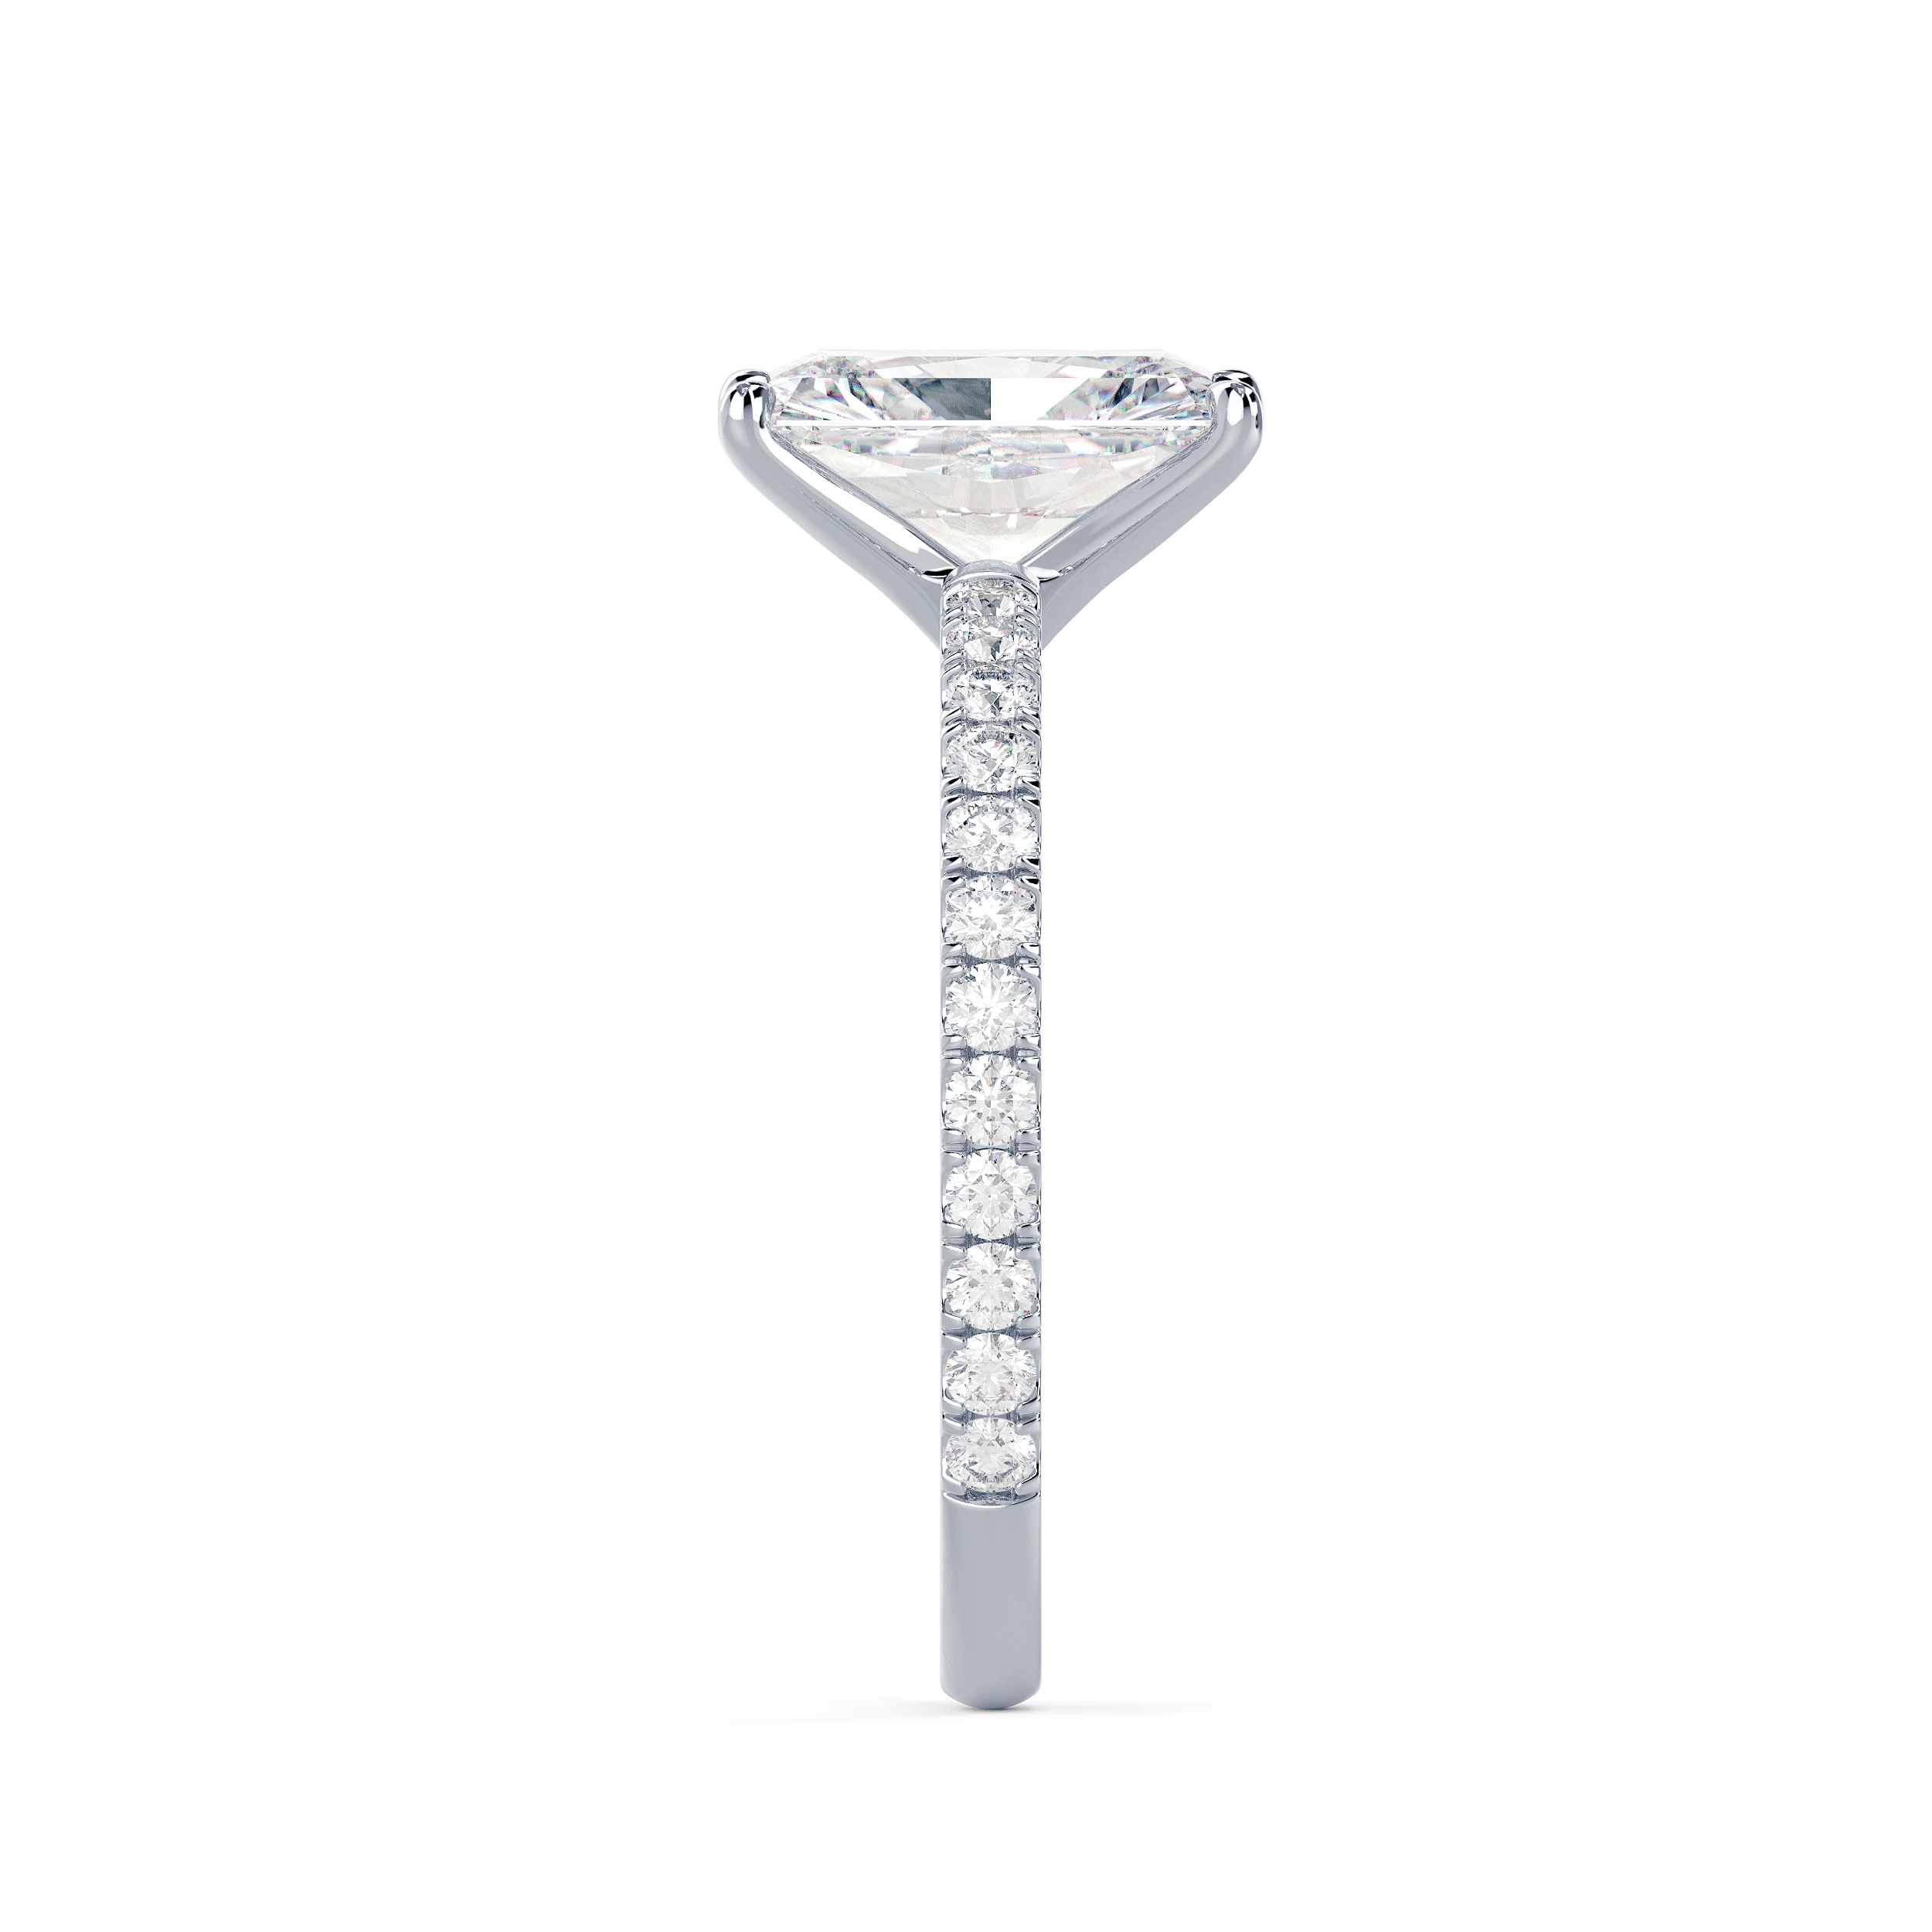 Exceptional Quality Lab Diamonds set in White Gold Radiant Classic Four Prong Pavé Setting (Side View)